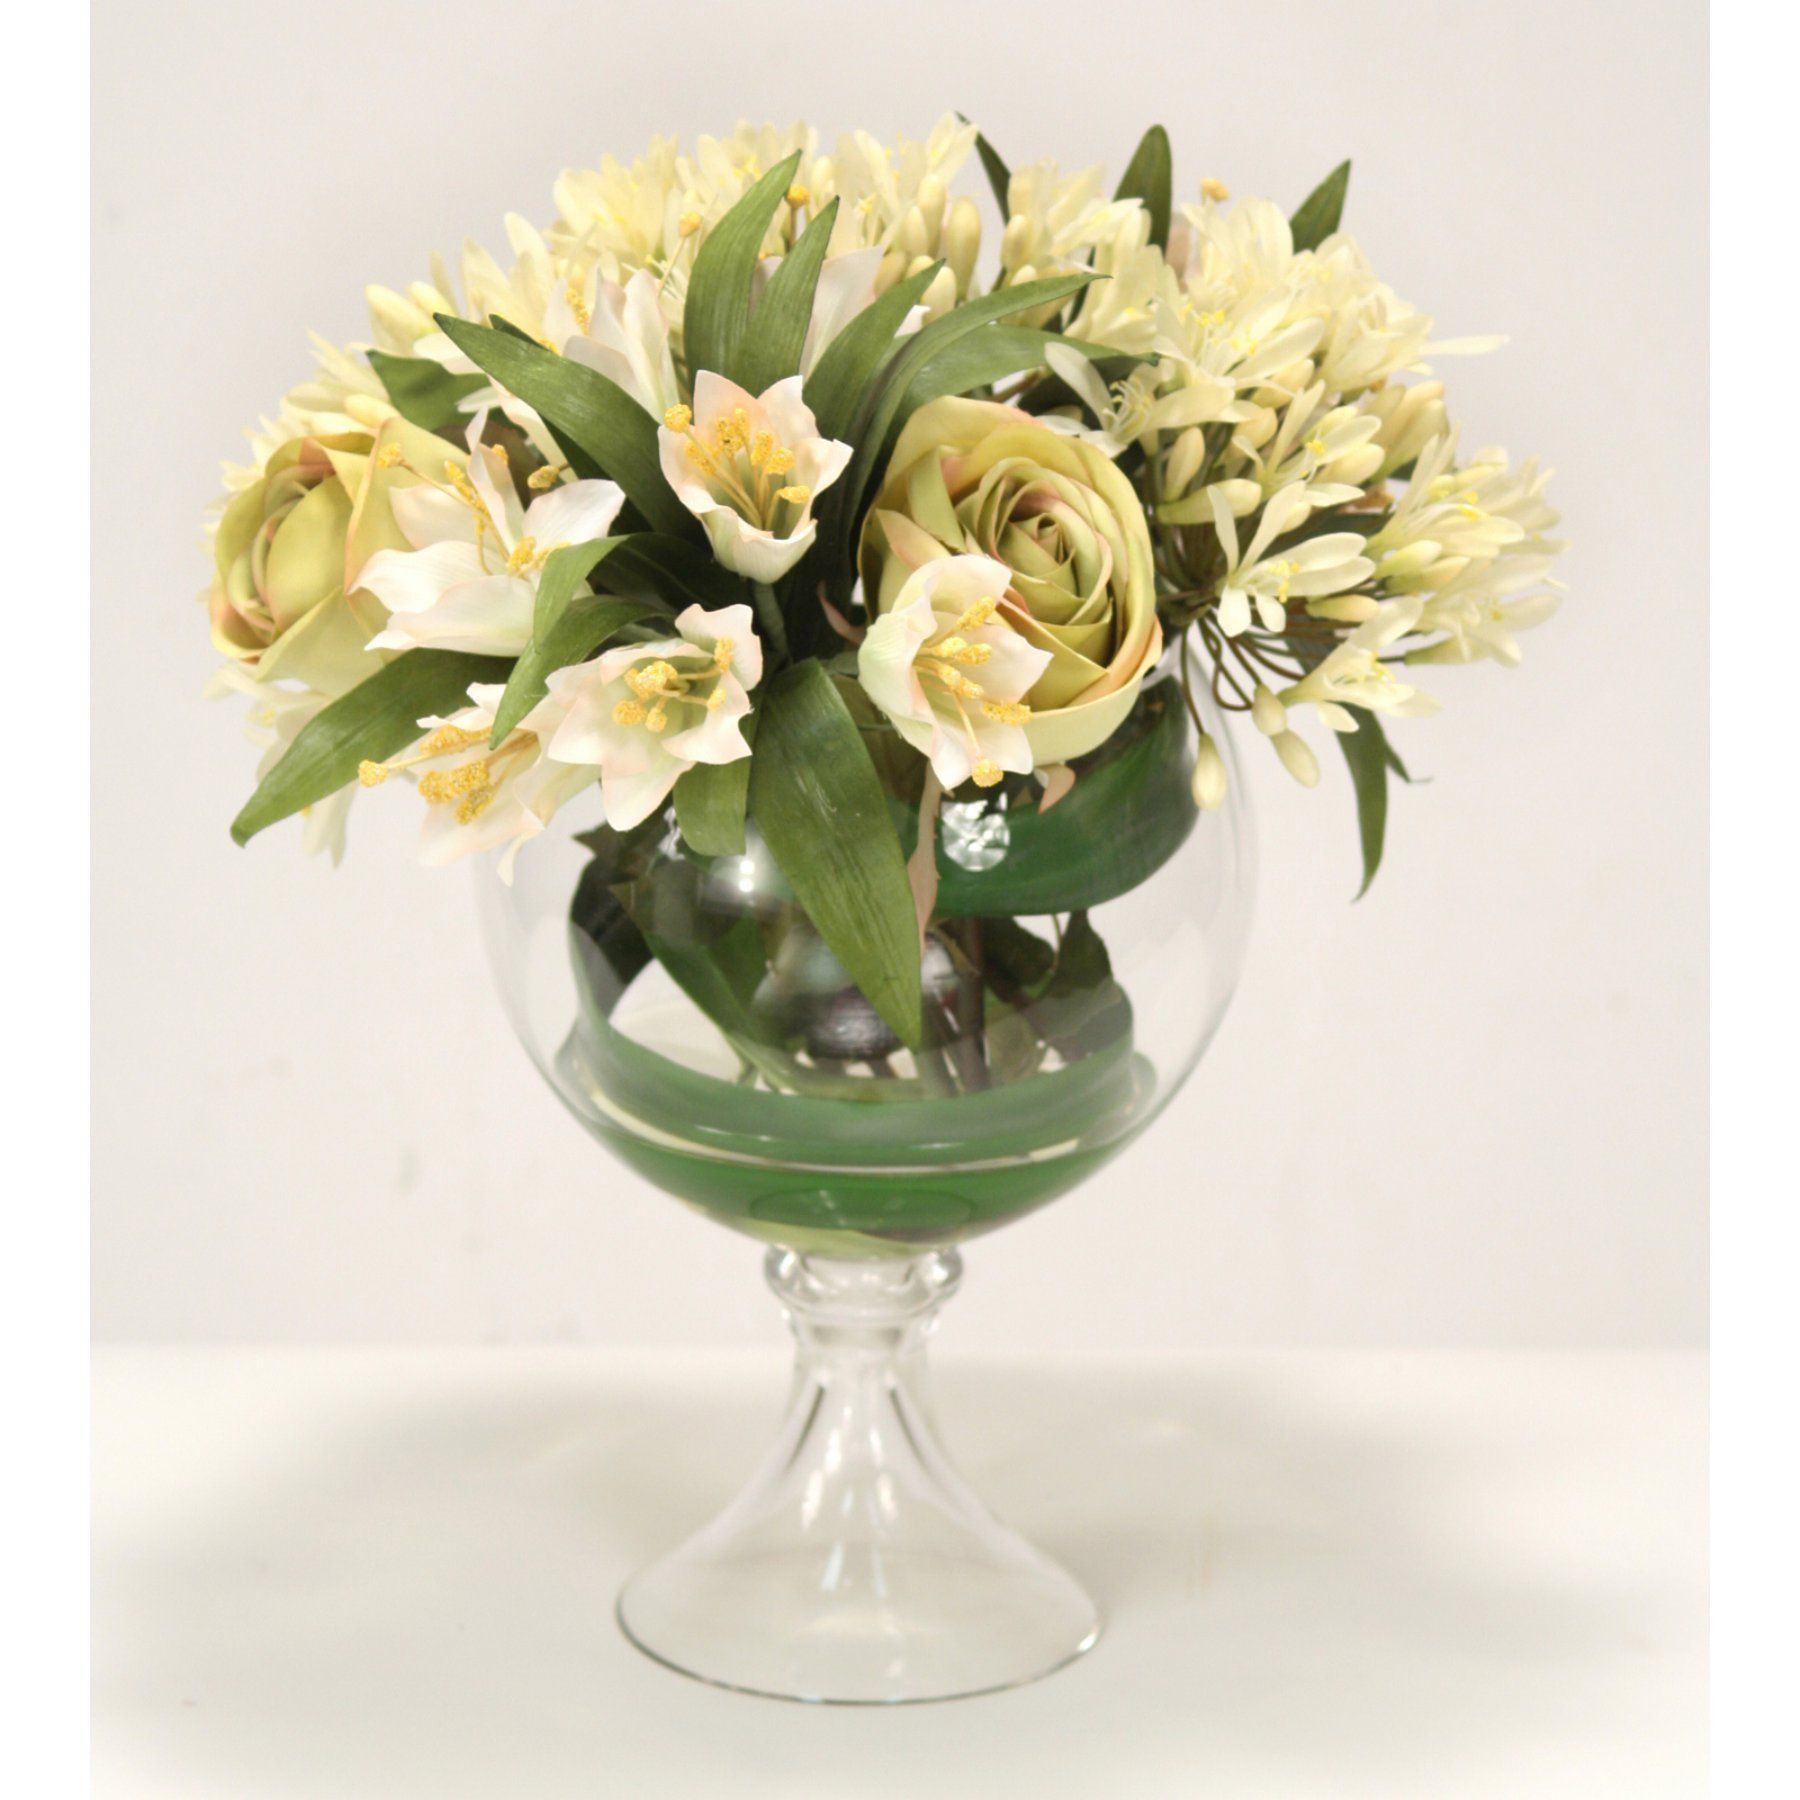 marks and spencer flowers review